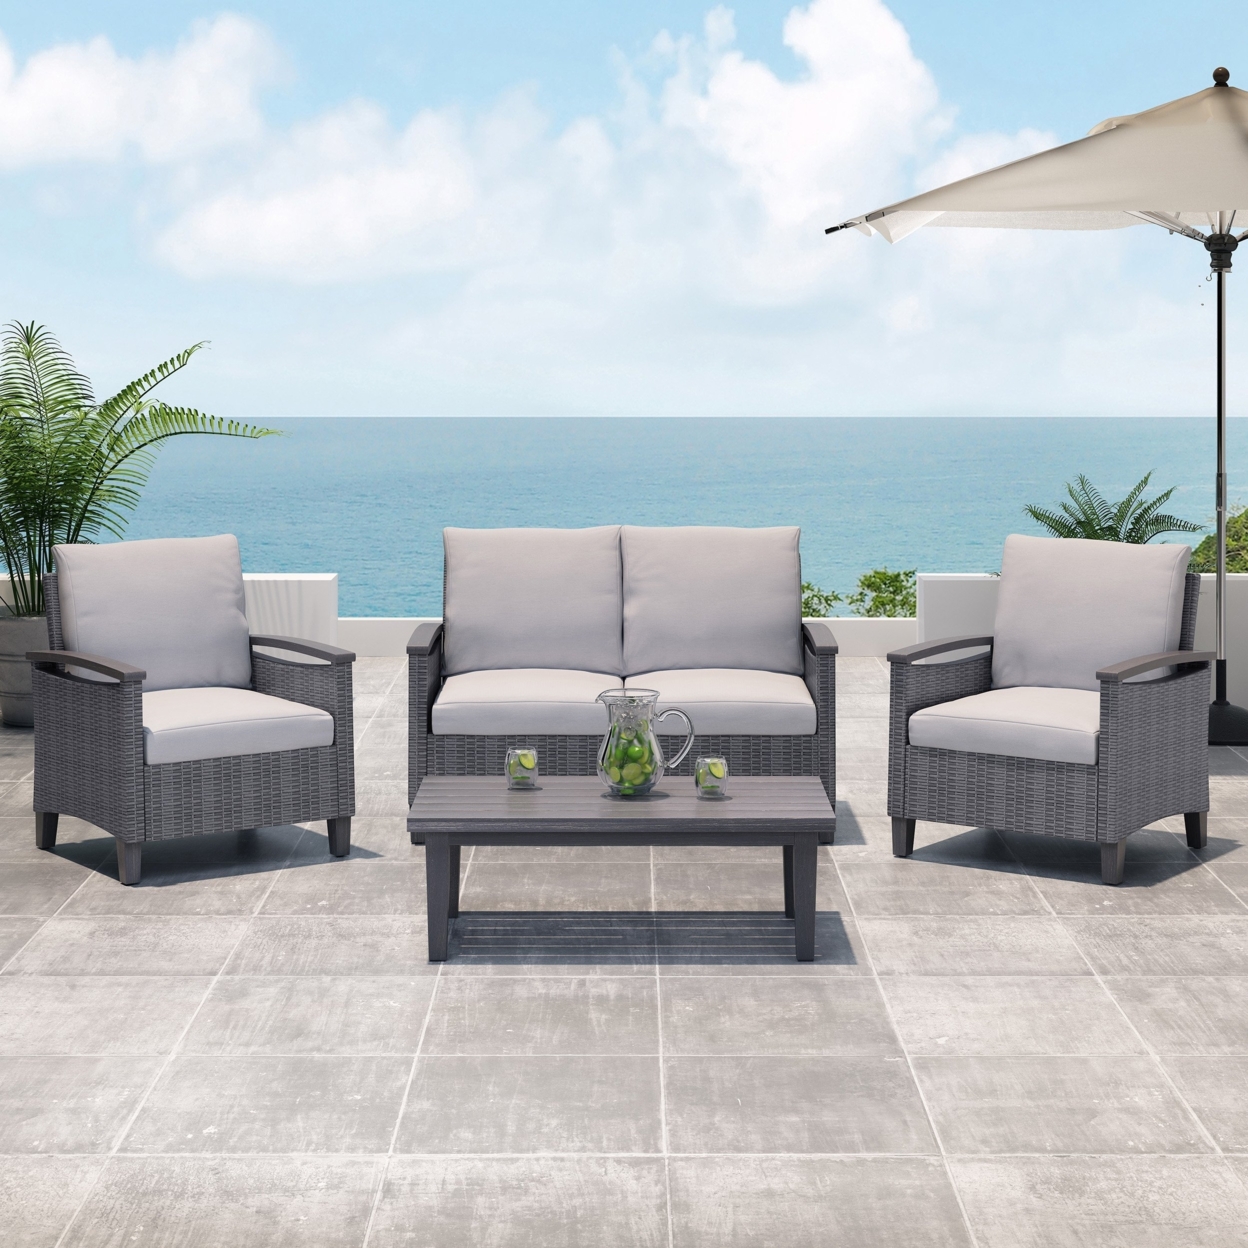 Velthur Outdoor 4 Seater Chat Set With Coffee Table - Dark Gray/gray